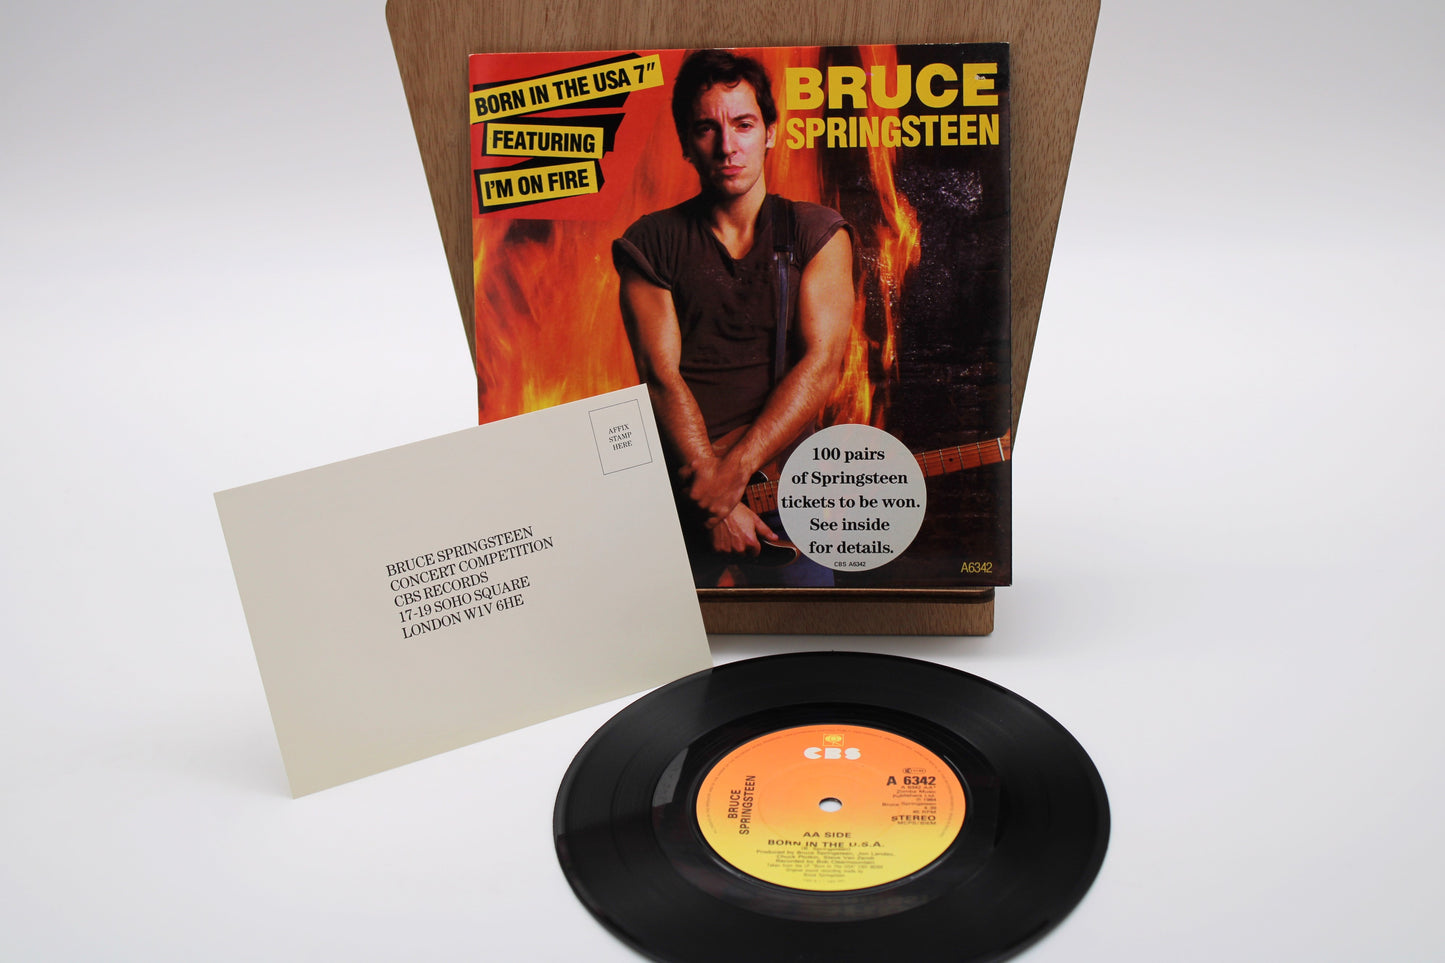 Bruce Springsteen - Born In The USA & I'm On Fire - CBS 45 Record with Competition Sticker & Original Card